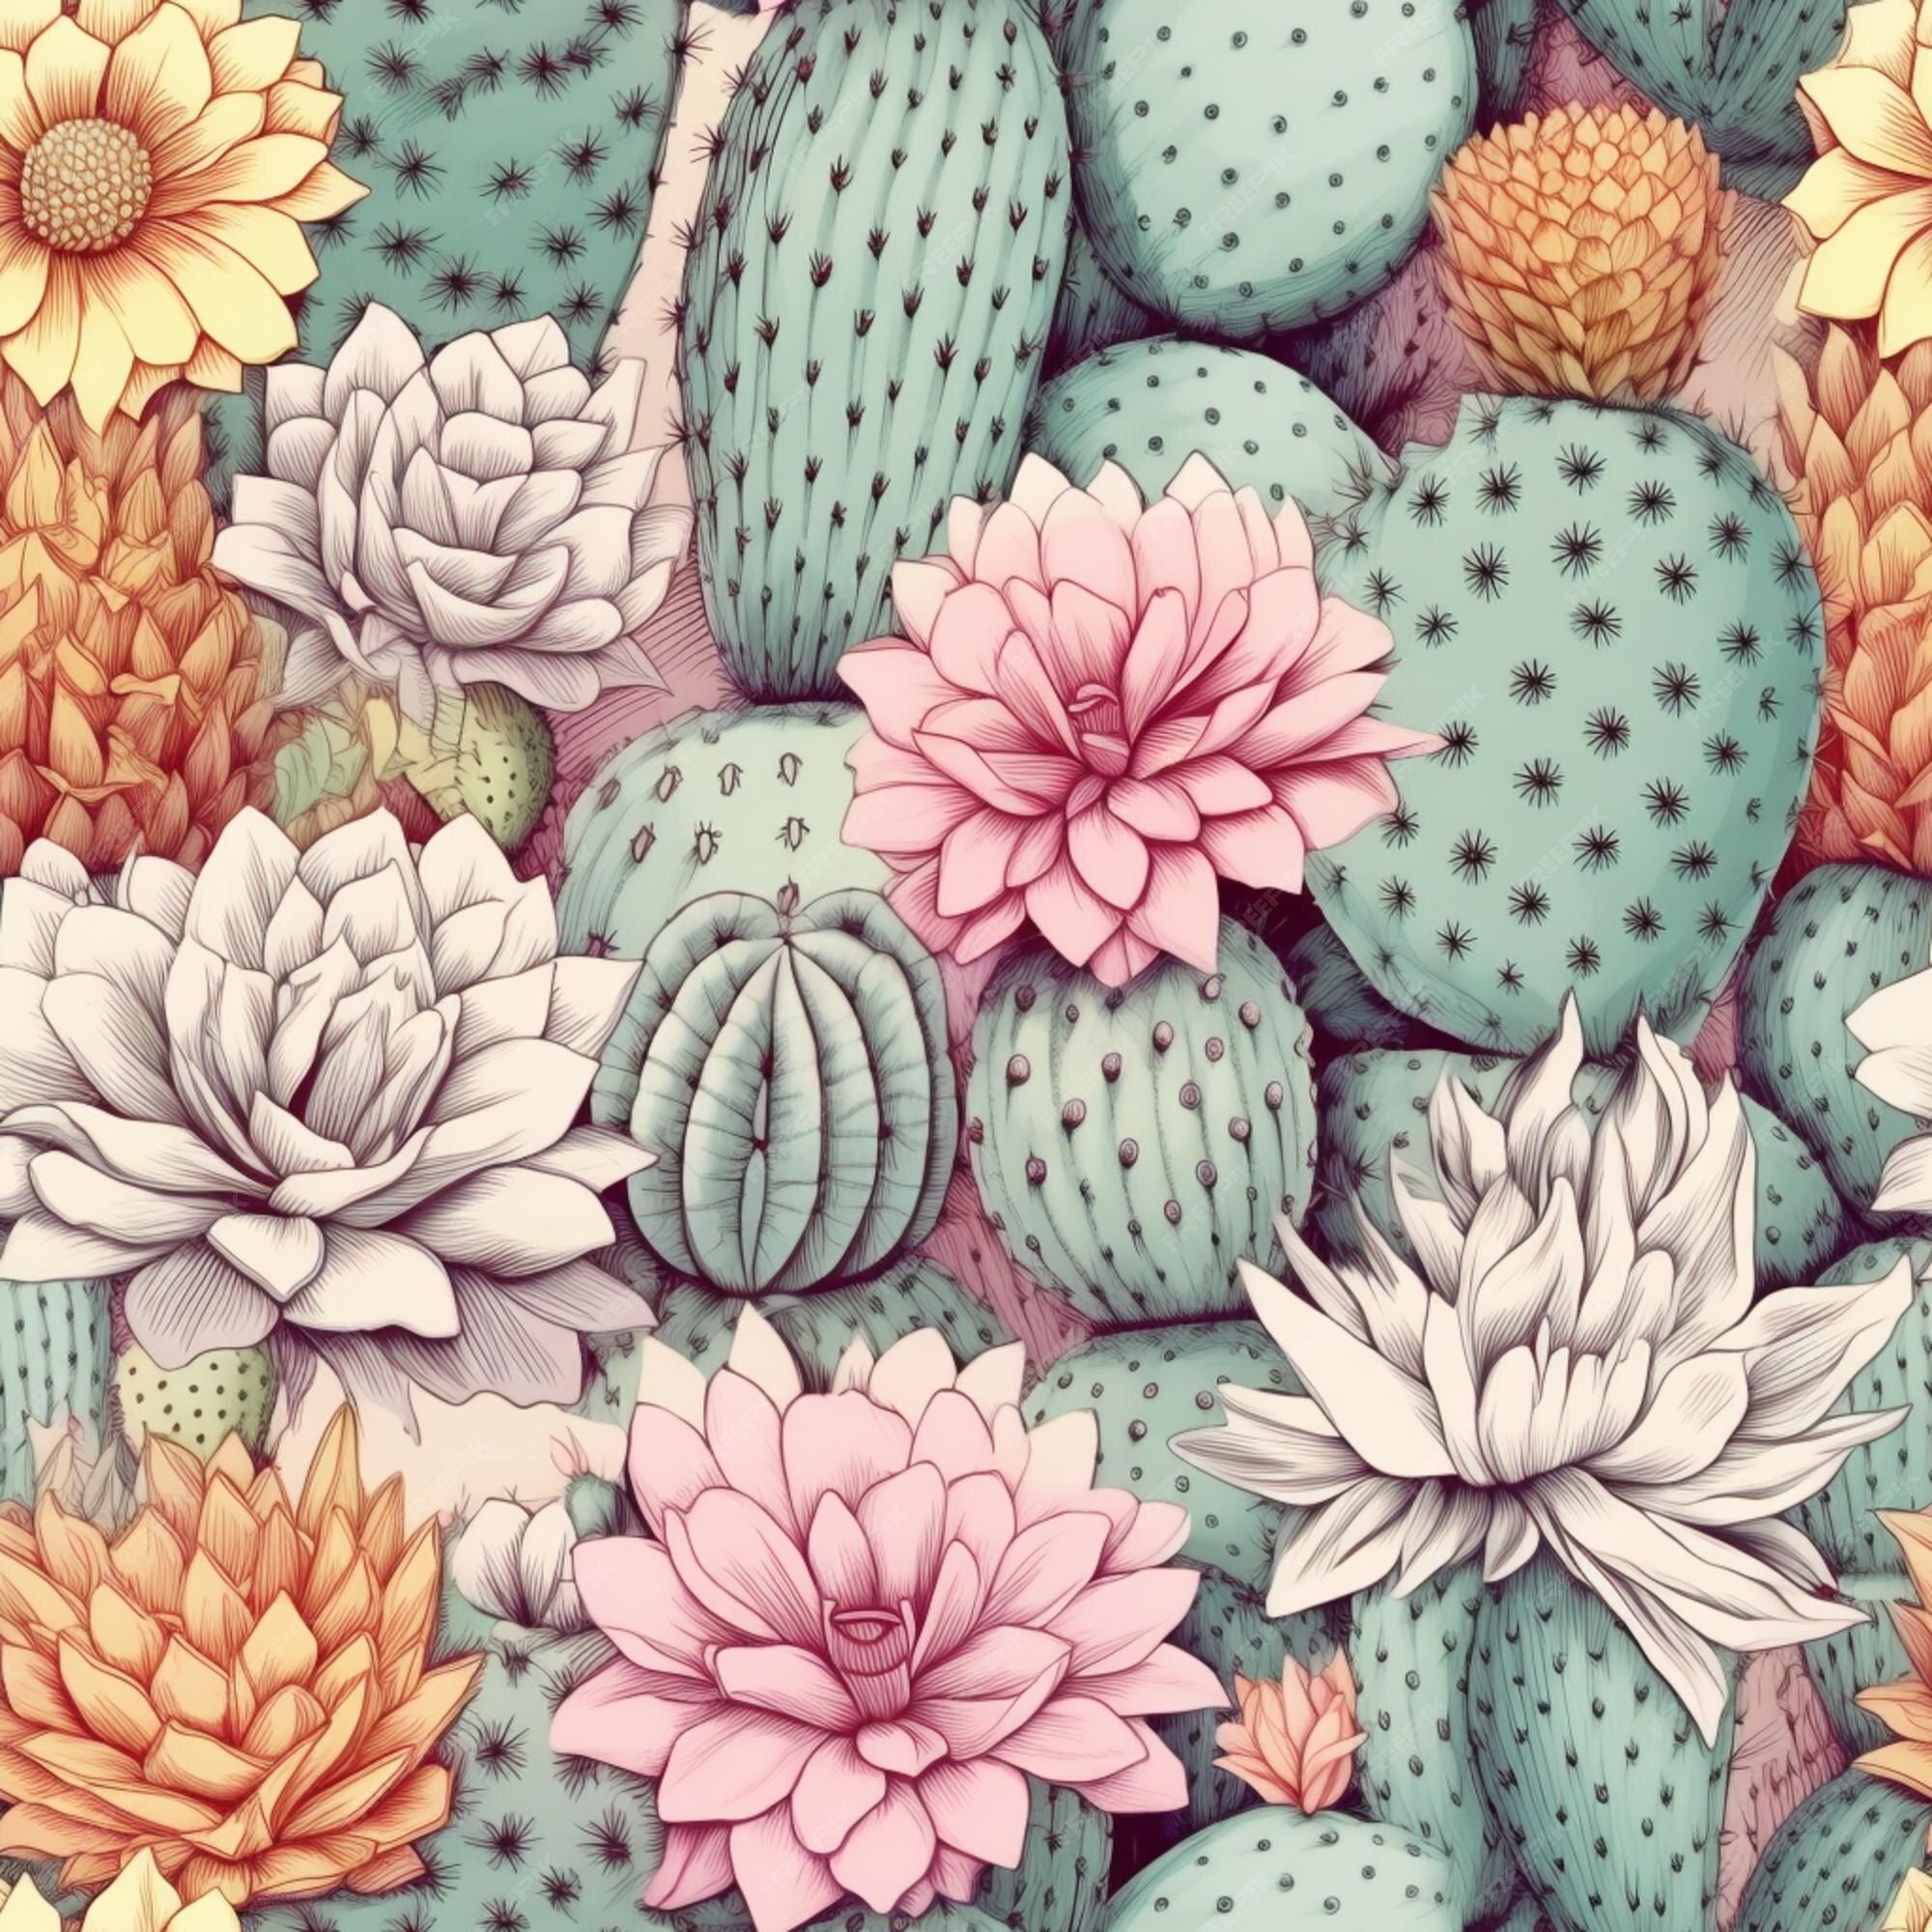 A colorful succulent wallpaper image with different types of cacti and flowers. - Succulent